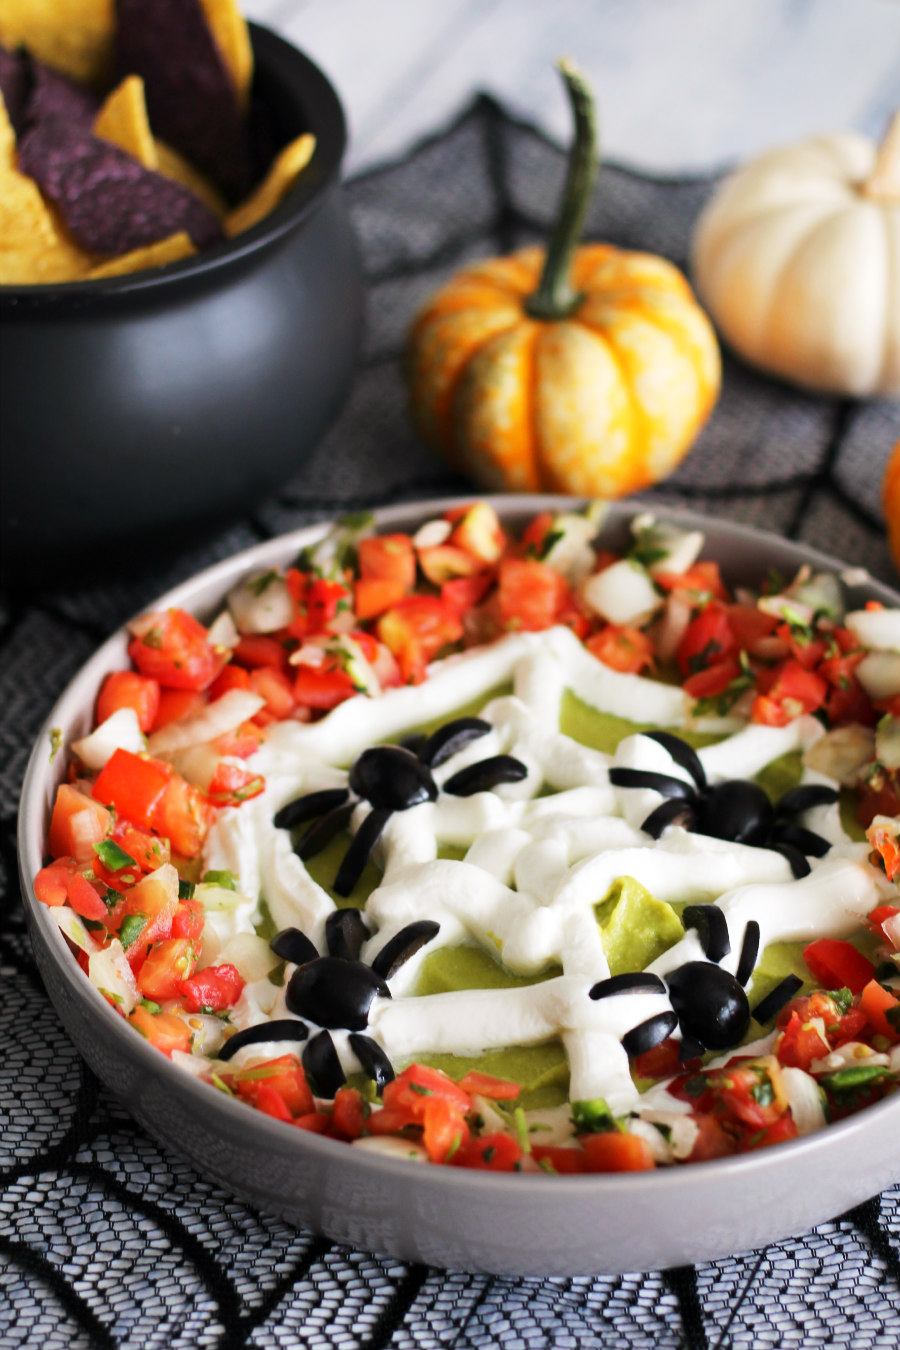 Enjoy spooky snacking with this Halloween Spiderweb Avocado Hummus Dip at your Halloween party! This healthy Halloween recipe is made like traditional hummus, but with avocado, a plain Greek yogurt spiderweb, black olive spiders, and pico de gallo!